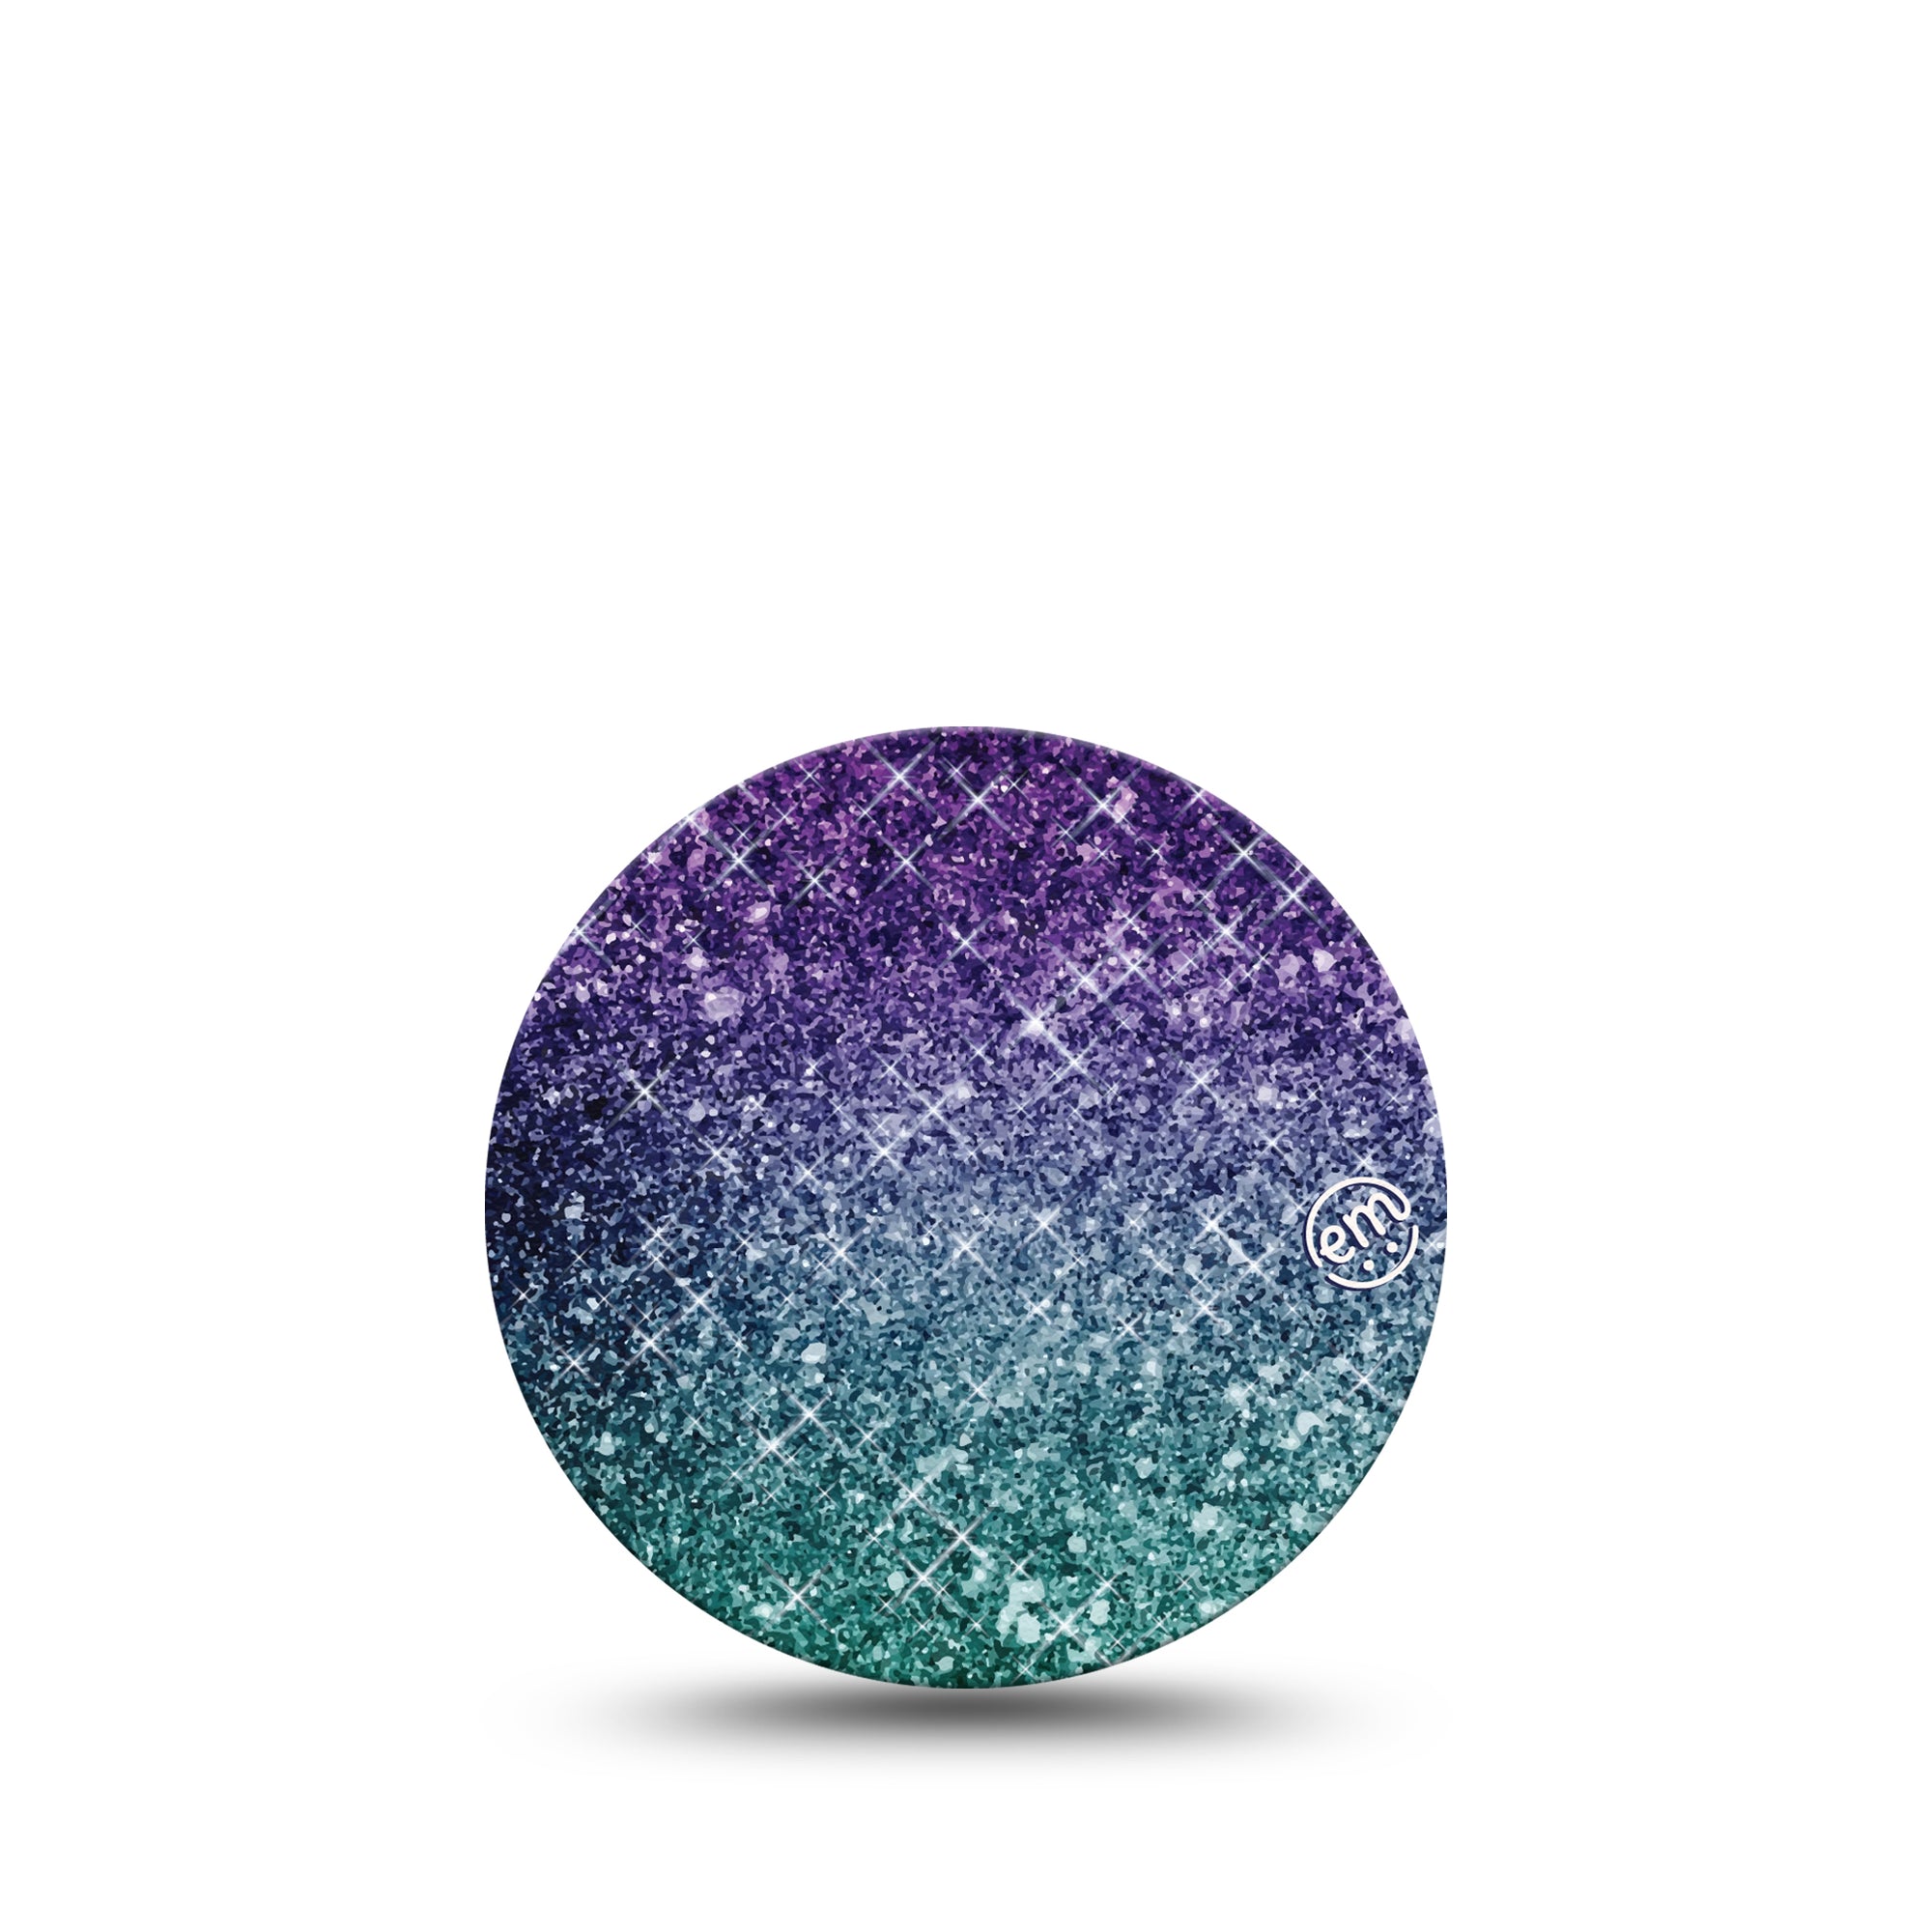 ExpressionMed Glittering Ombre Libre 3 Overpatch, Single, Shining Shimmering Ombre Themed, CGM Adhesive Tape Design